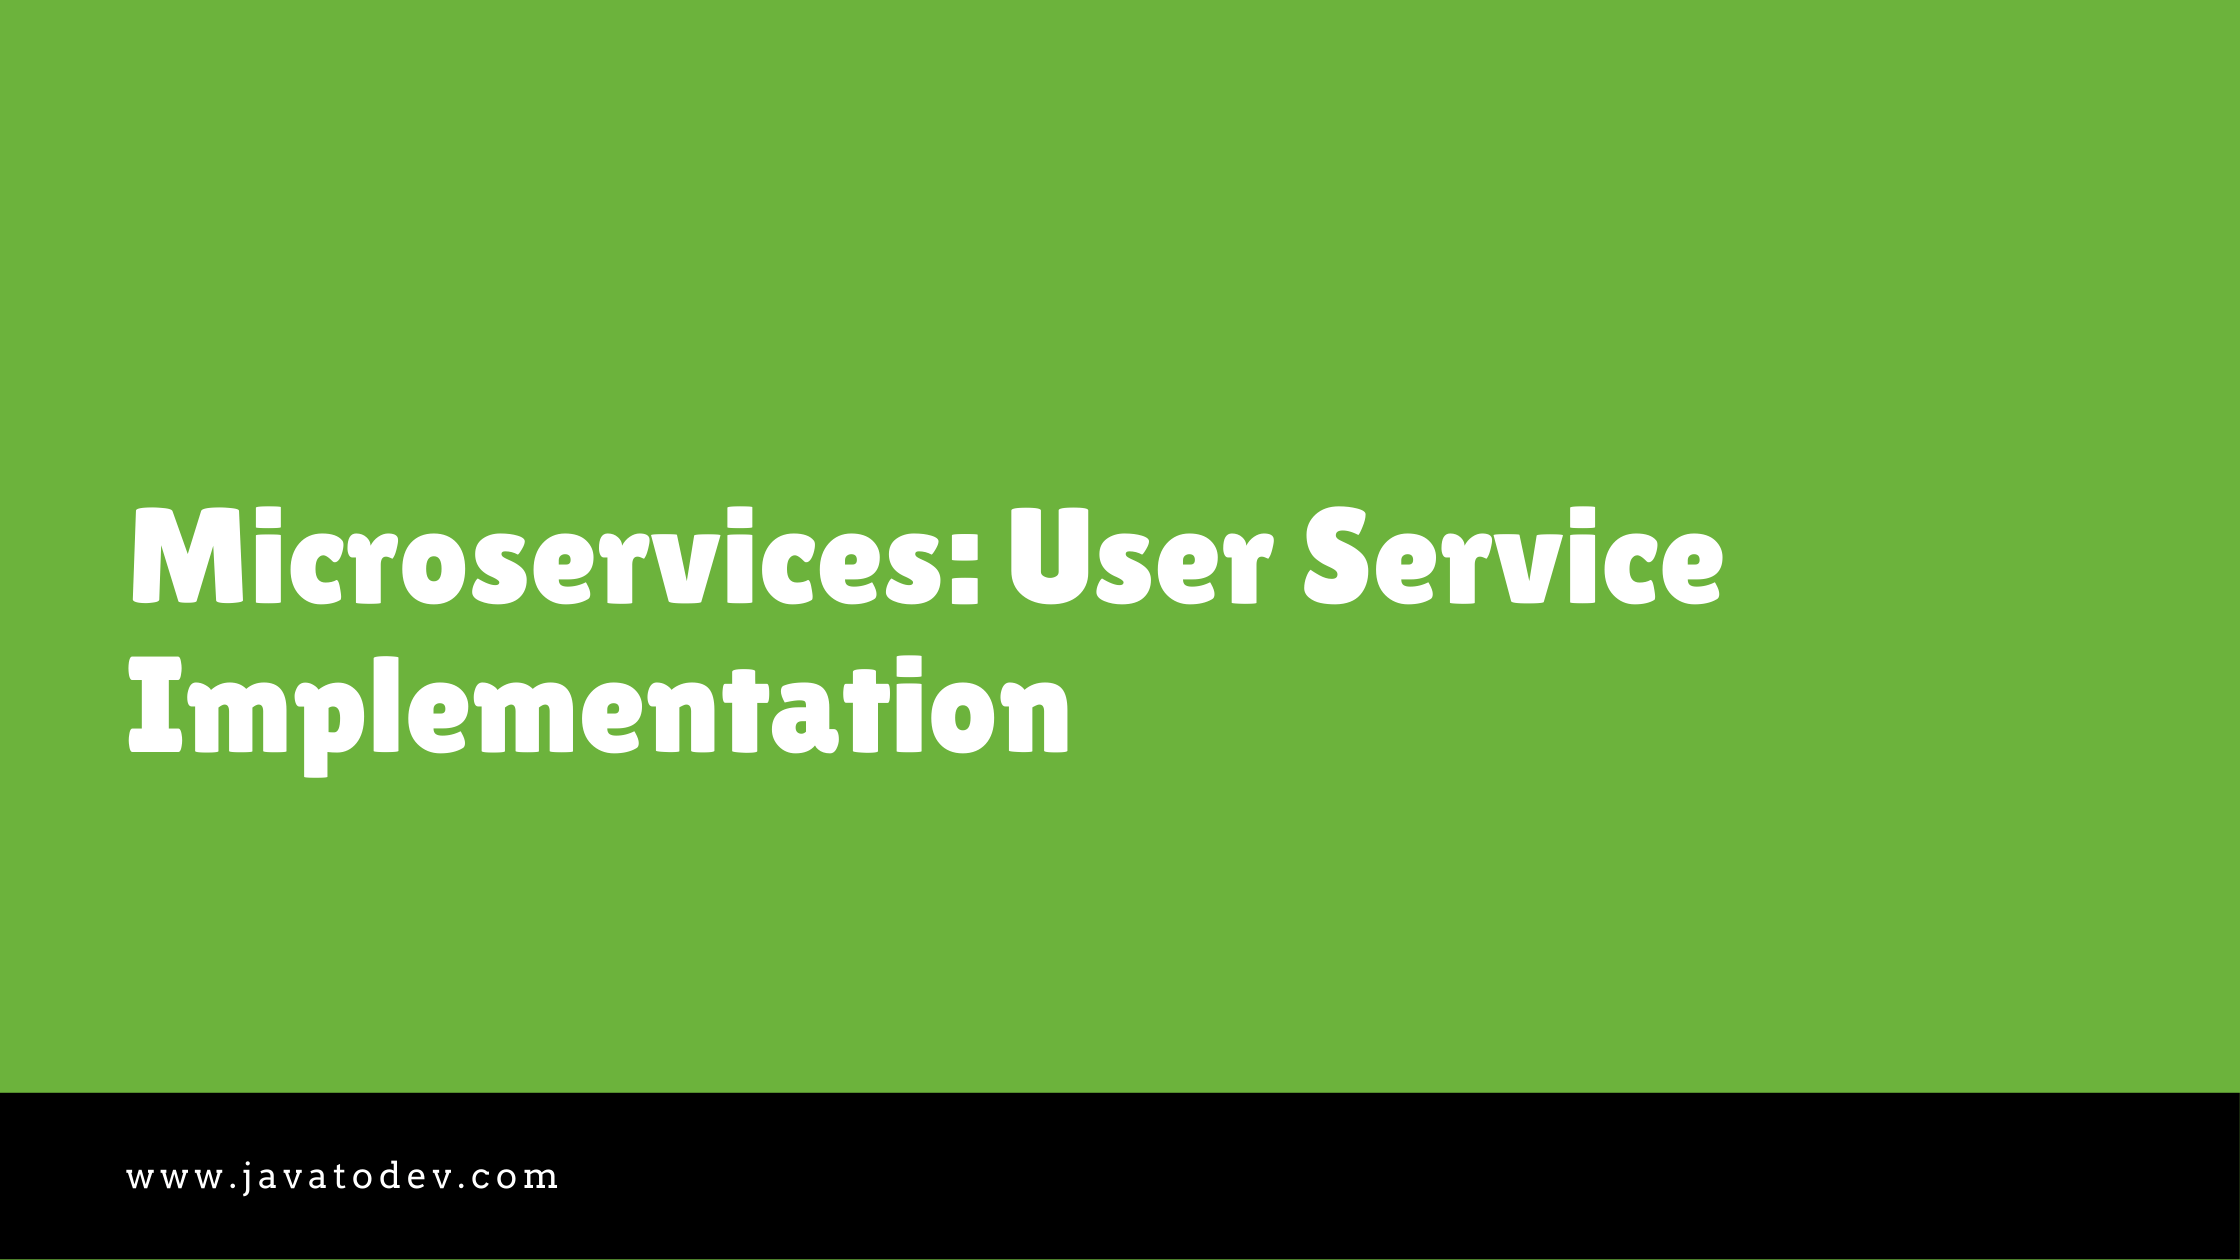 Microservices - User Service Implementation